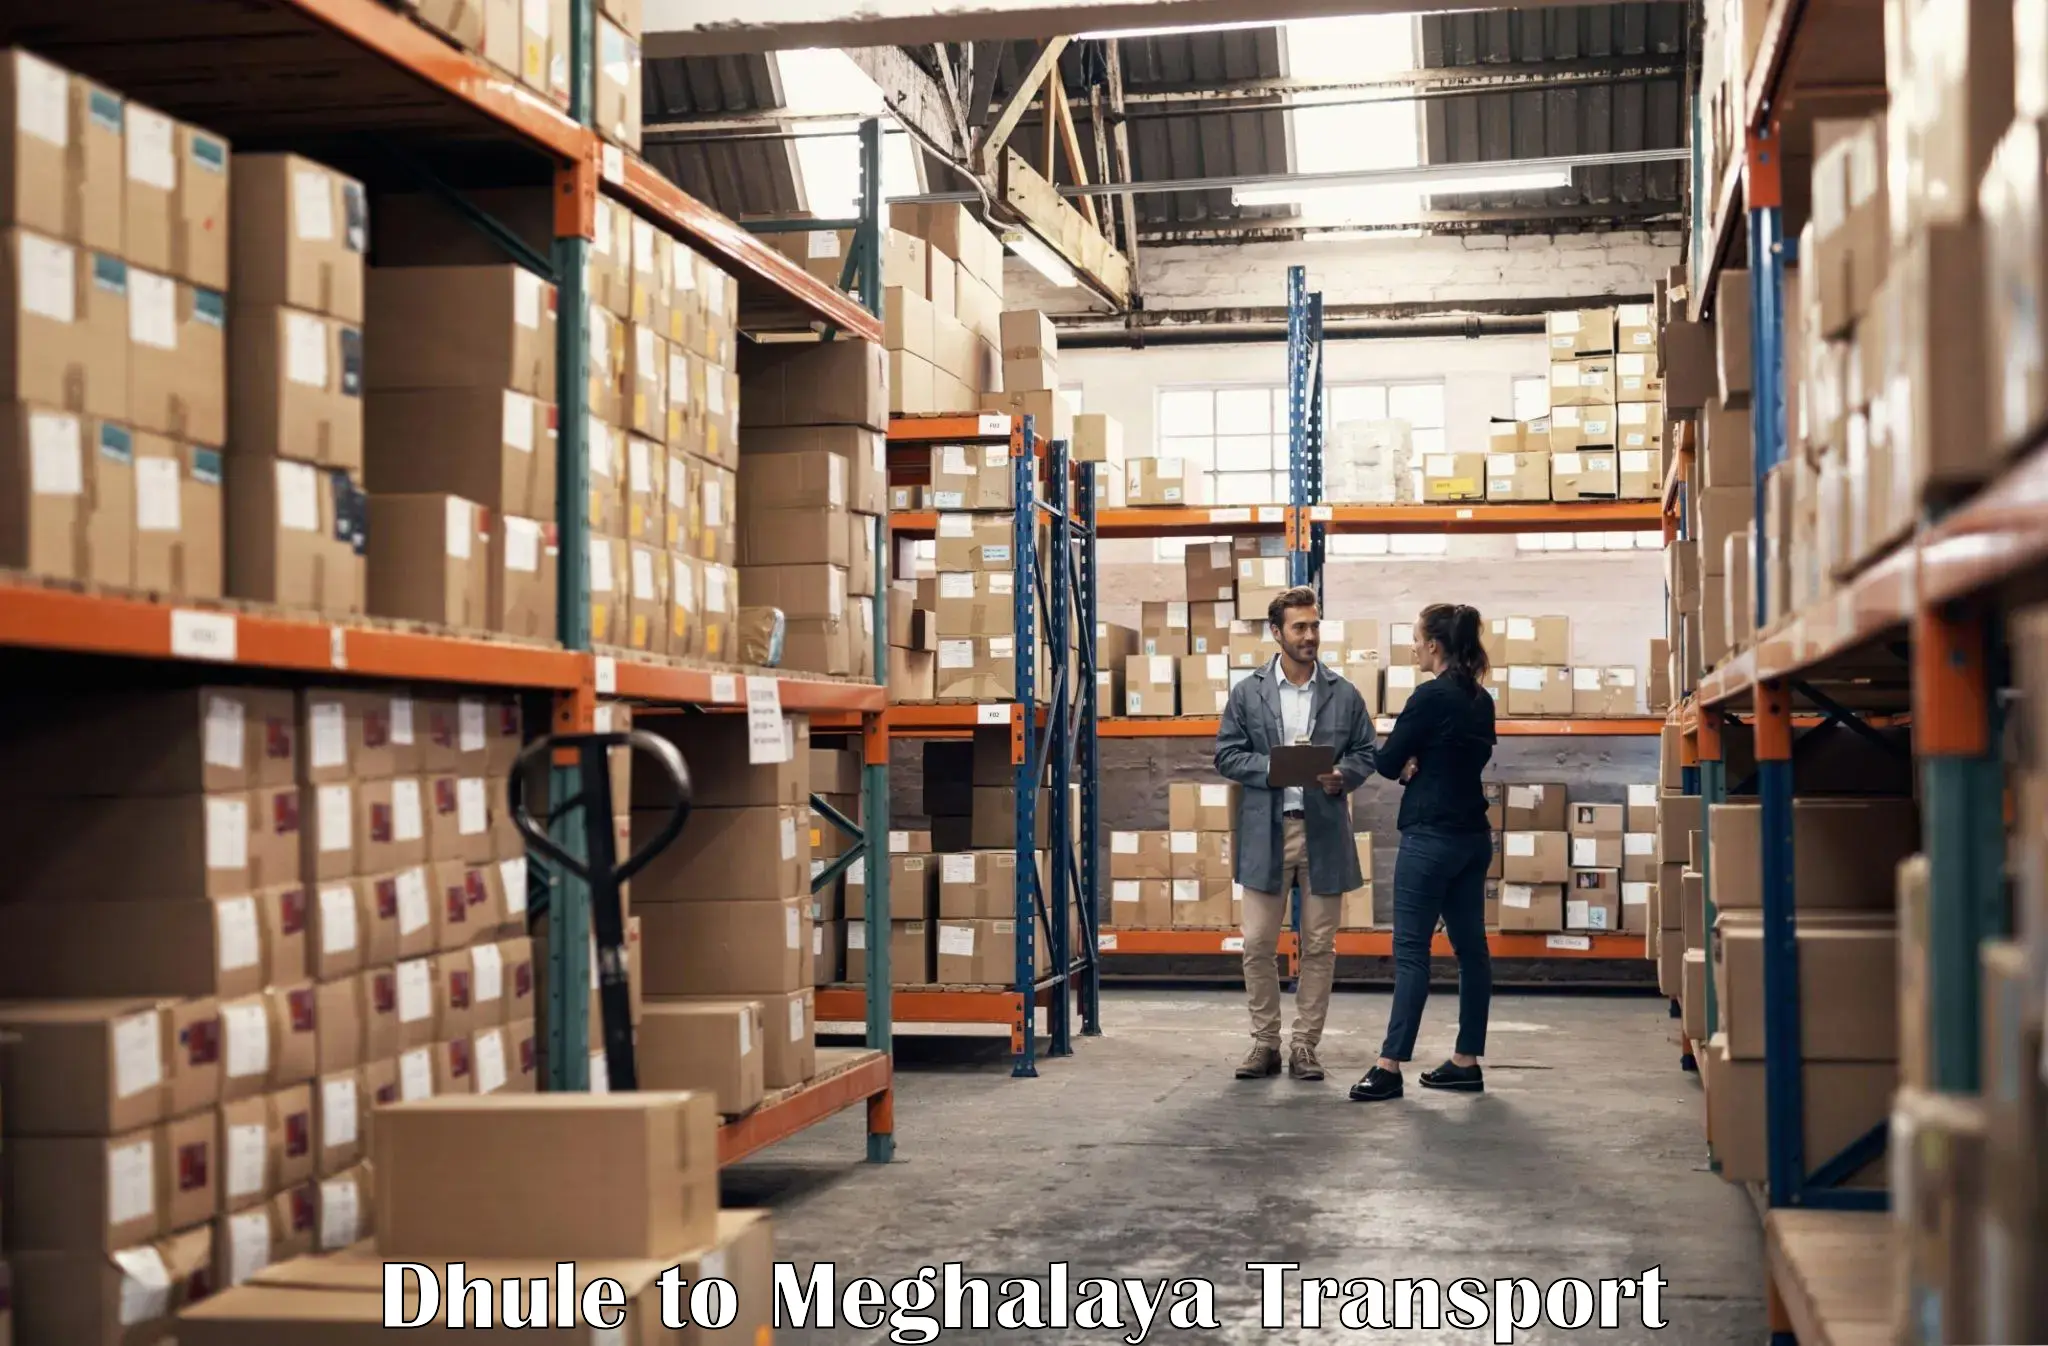 Truck transport companies in India Dhule to Dkhiah West